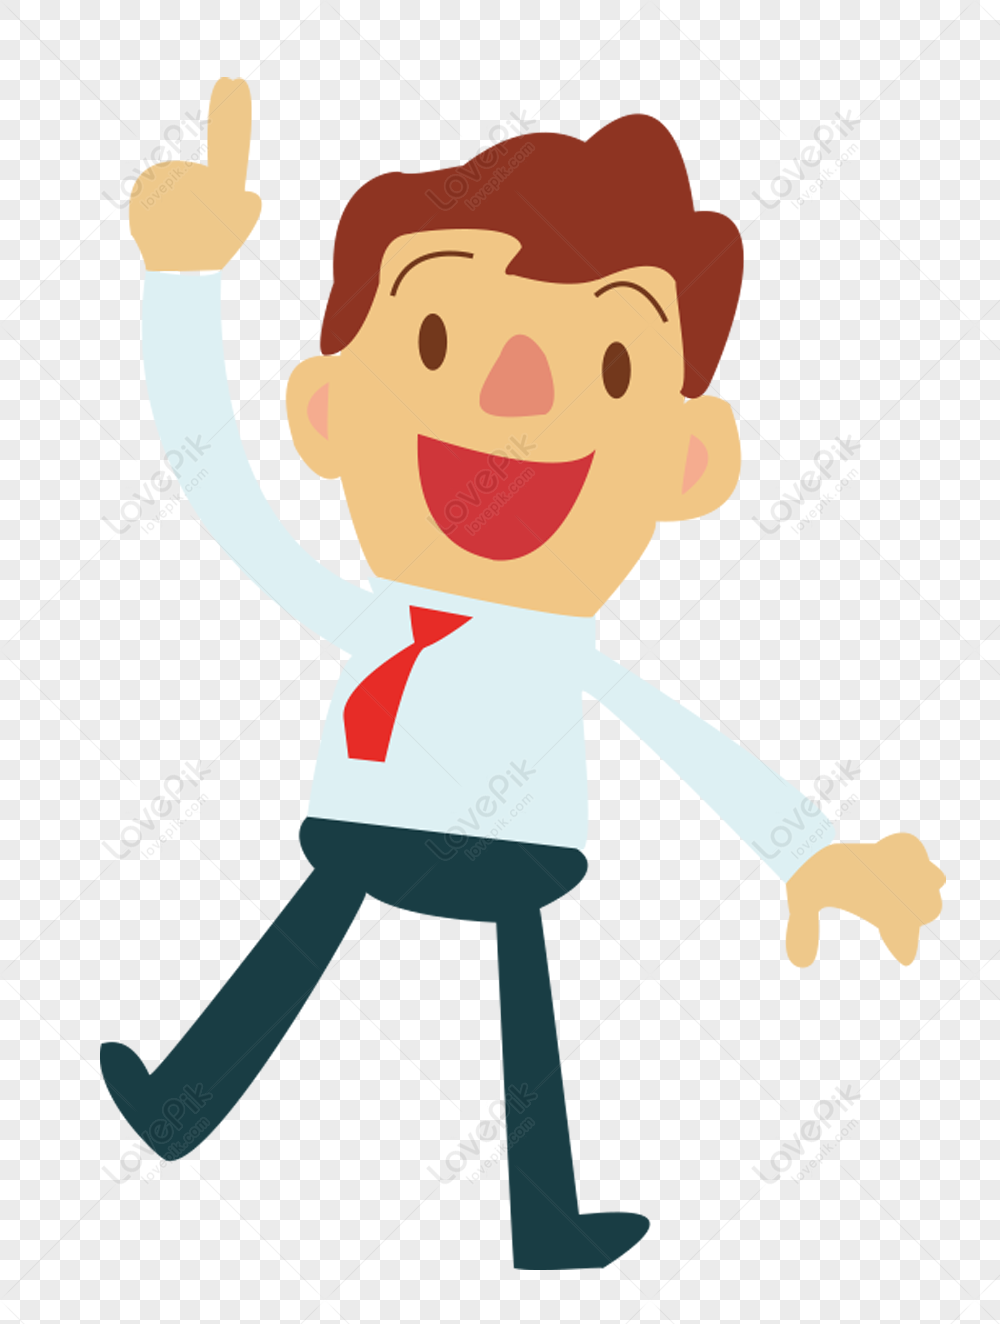 Performance First Happy Businessmen Free PNG And Clipart Image For Free  Download - Lovepik | 400313869